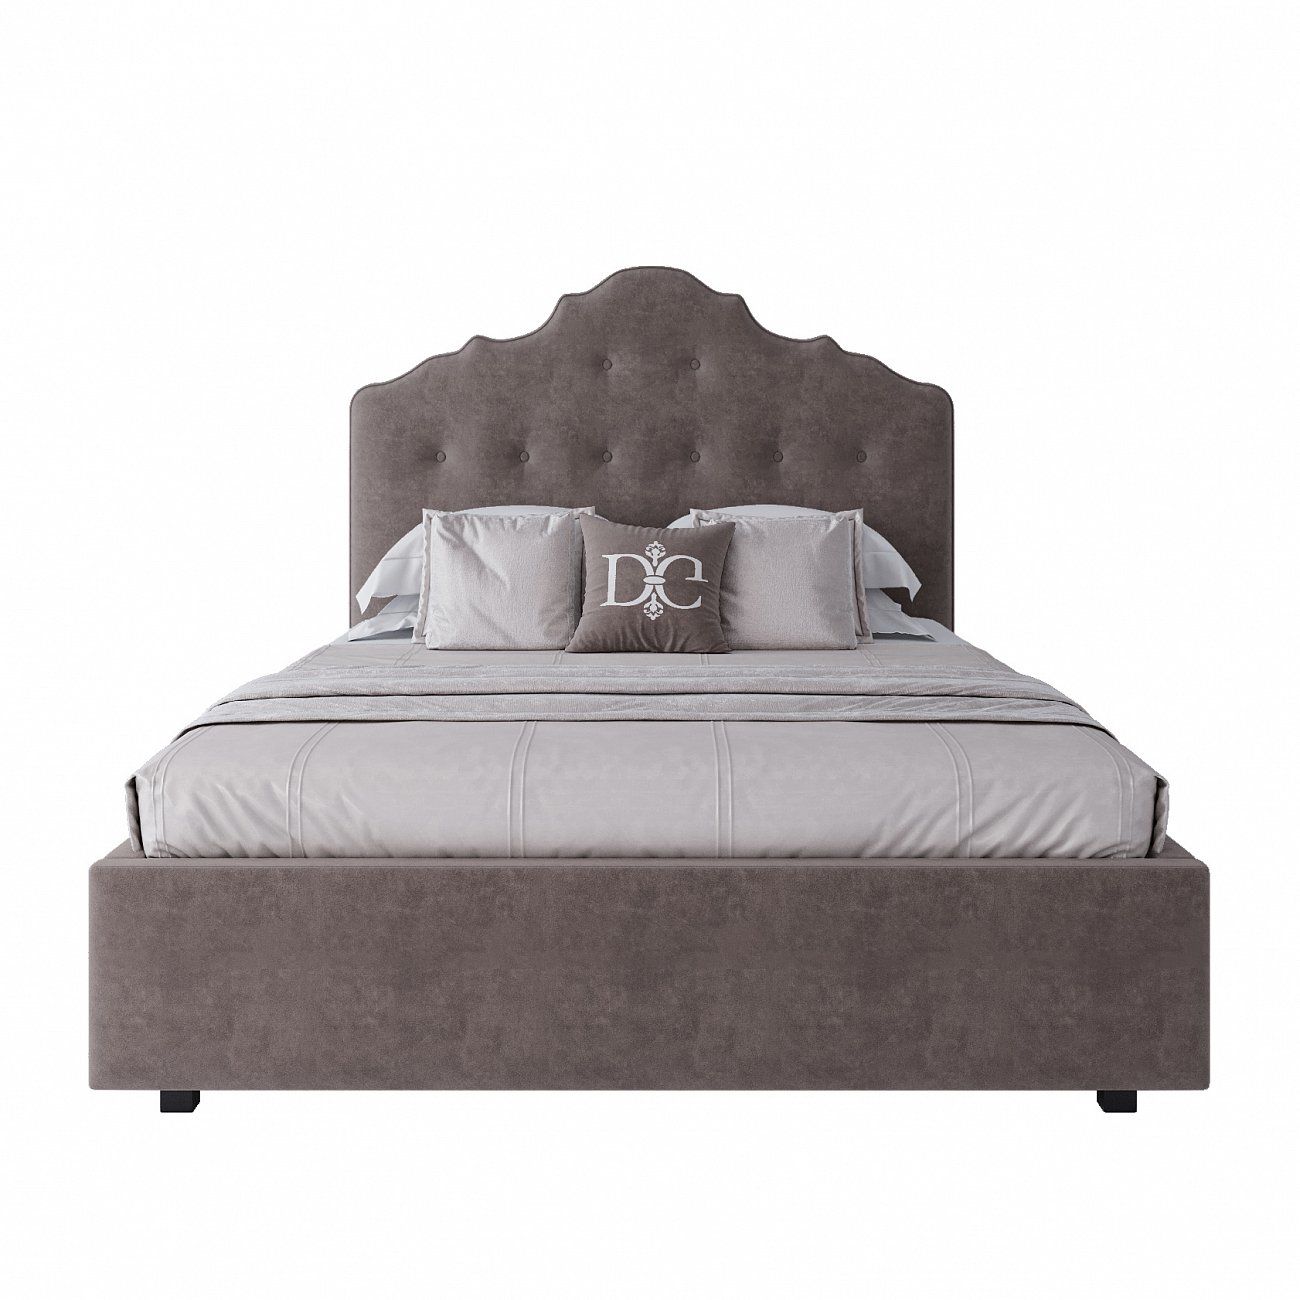 Semi-double teenage bed with a soft headboard 140x200 cm gray-brown Palace